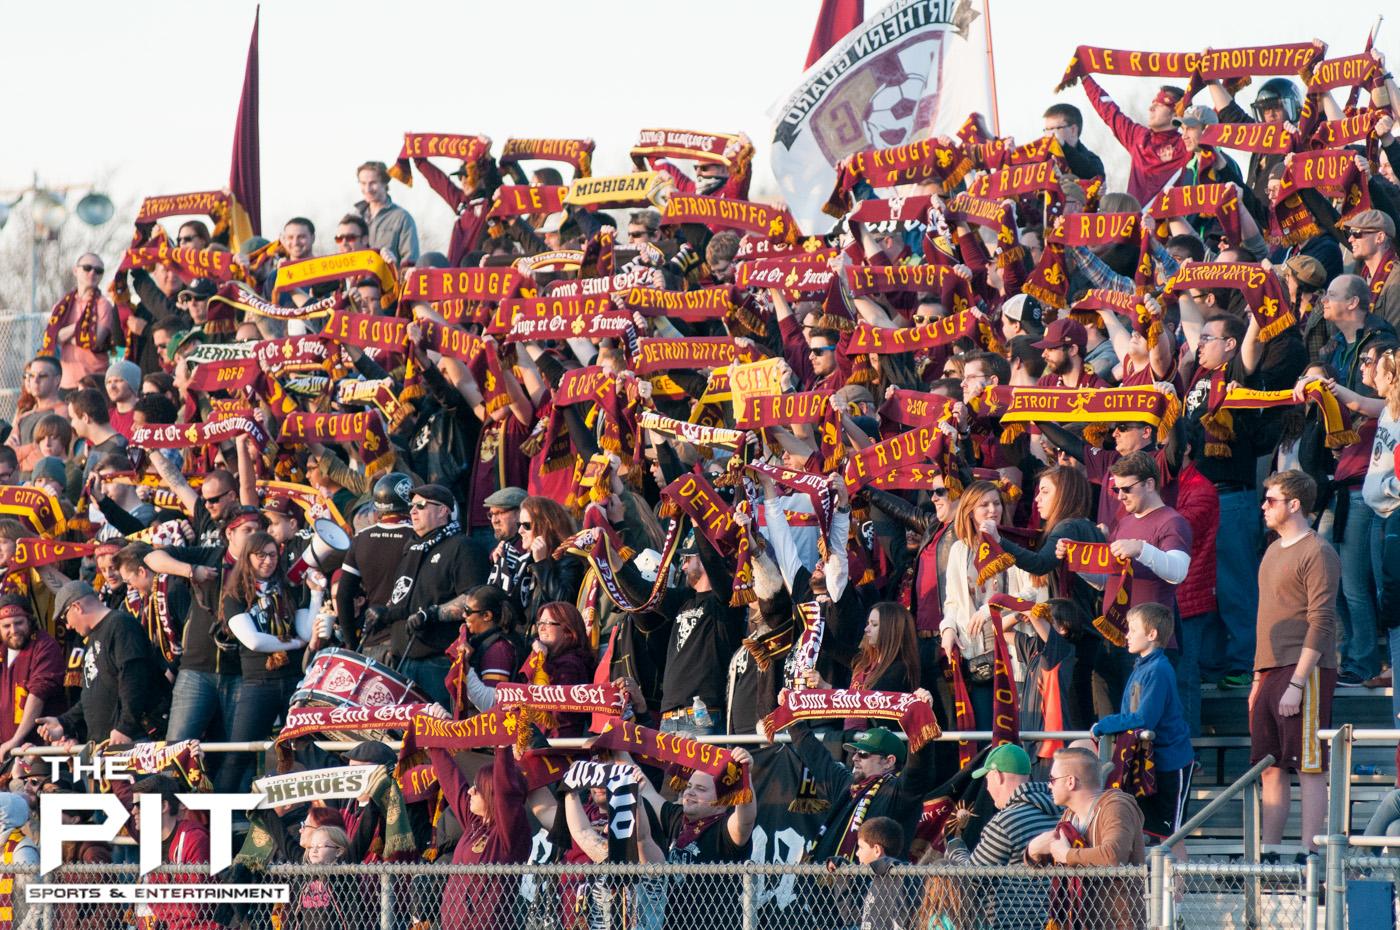 A packed Detroit City FC crowd show off their "Le Rouge" and "Detroit City FC" scarfs to the opposing teams stands at a scrimmage match against Saginaw Valley on April 19, 2014 at Hurley Field. Brian Quintos / The Pit: SE